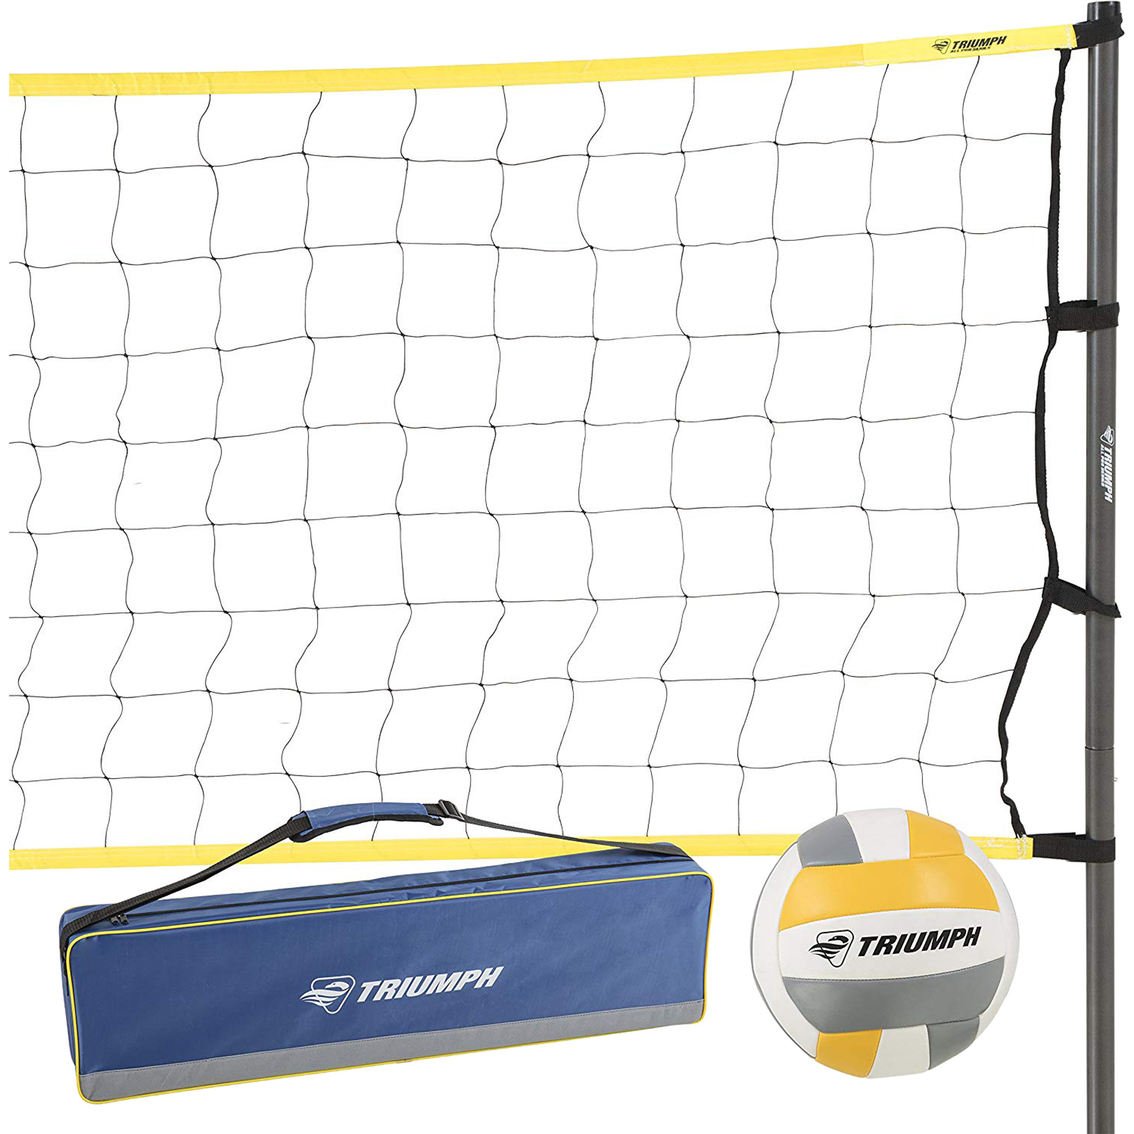 Triumph Sports Competition Volleyball Set - Image 3 of 4